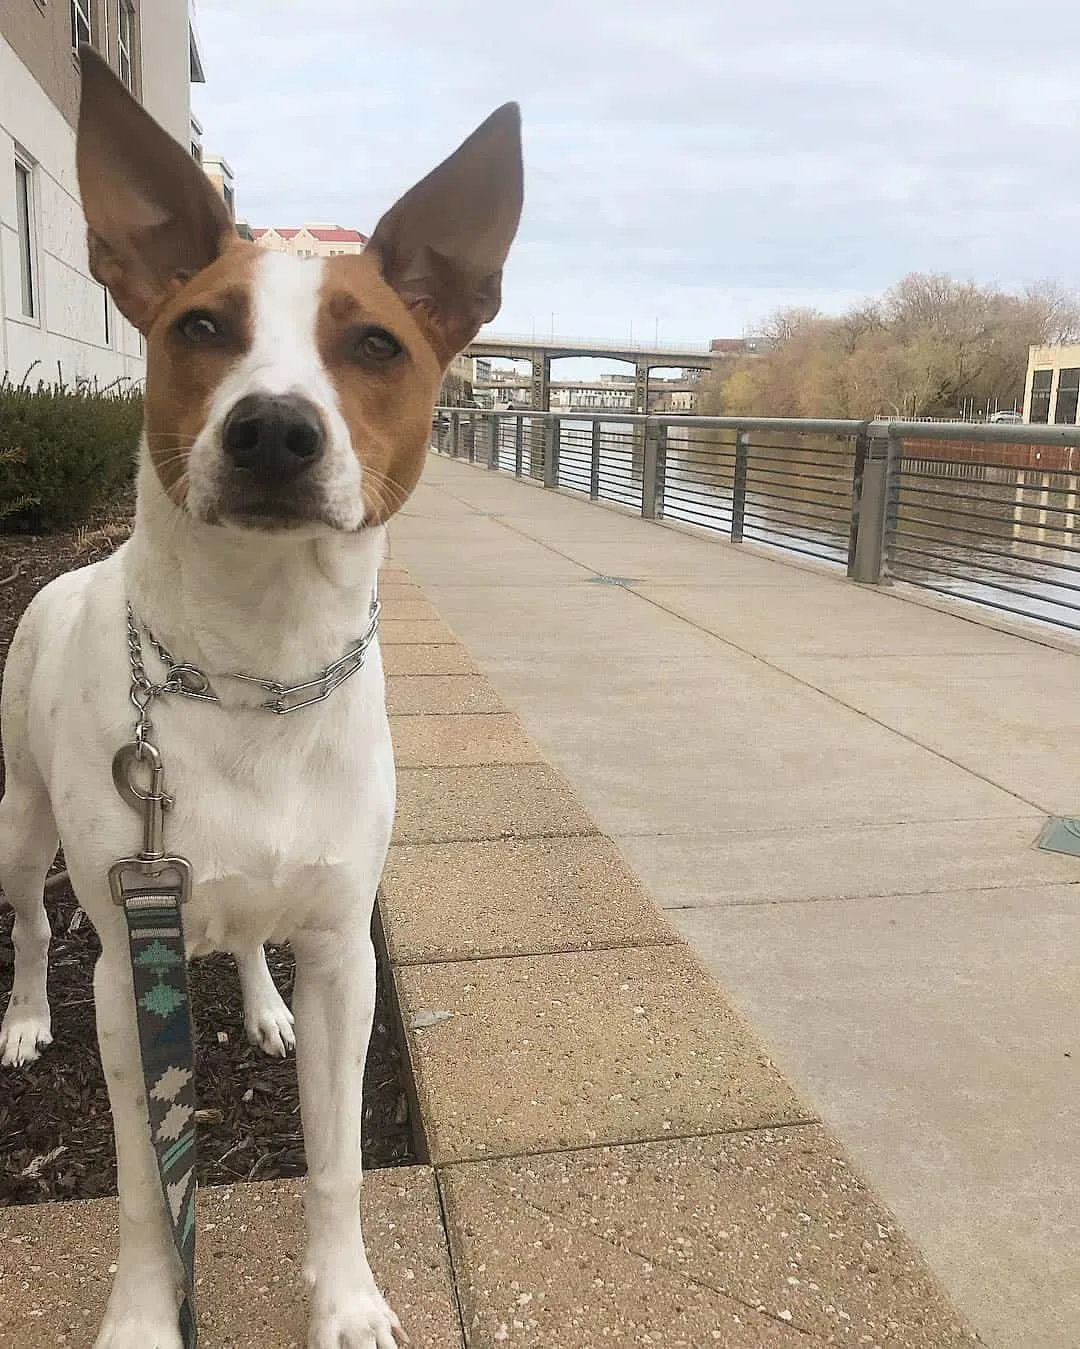 A Basenji Jack Russell Mix is standing on the street